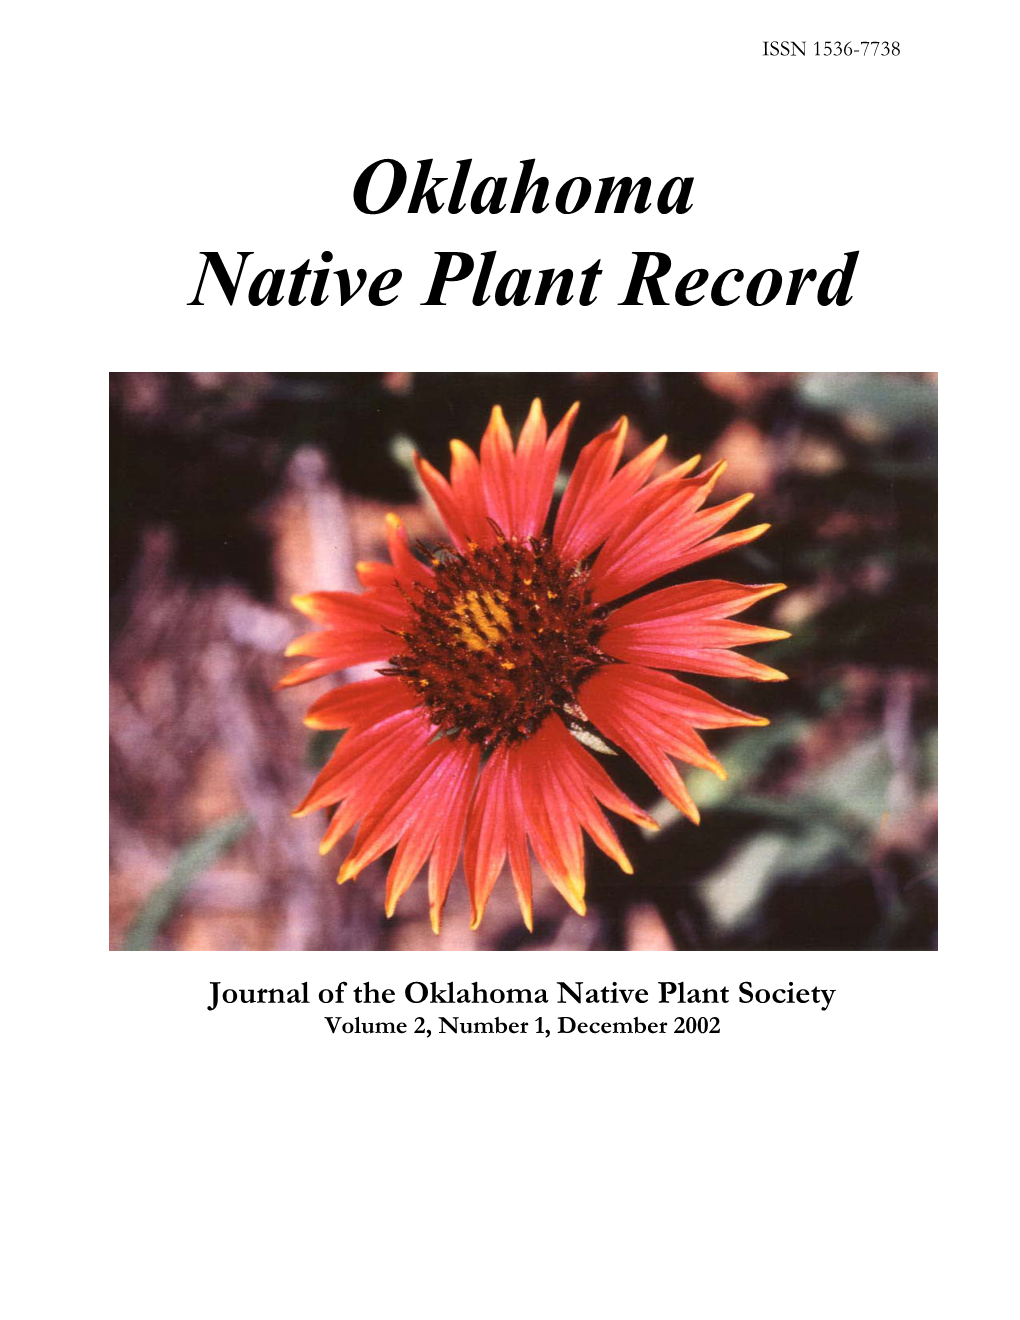 Journal of the Oklahoma Native Plant Society, Volume 2, Number 1